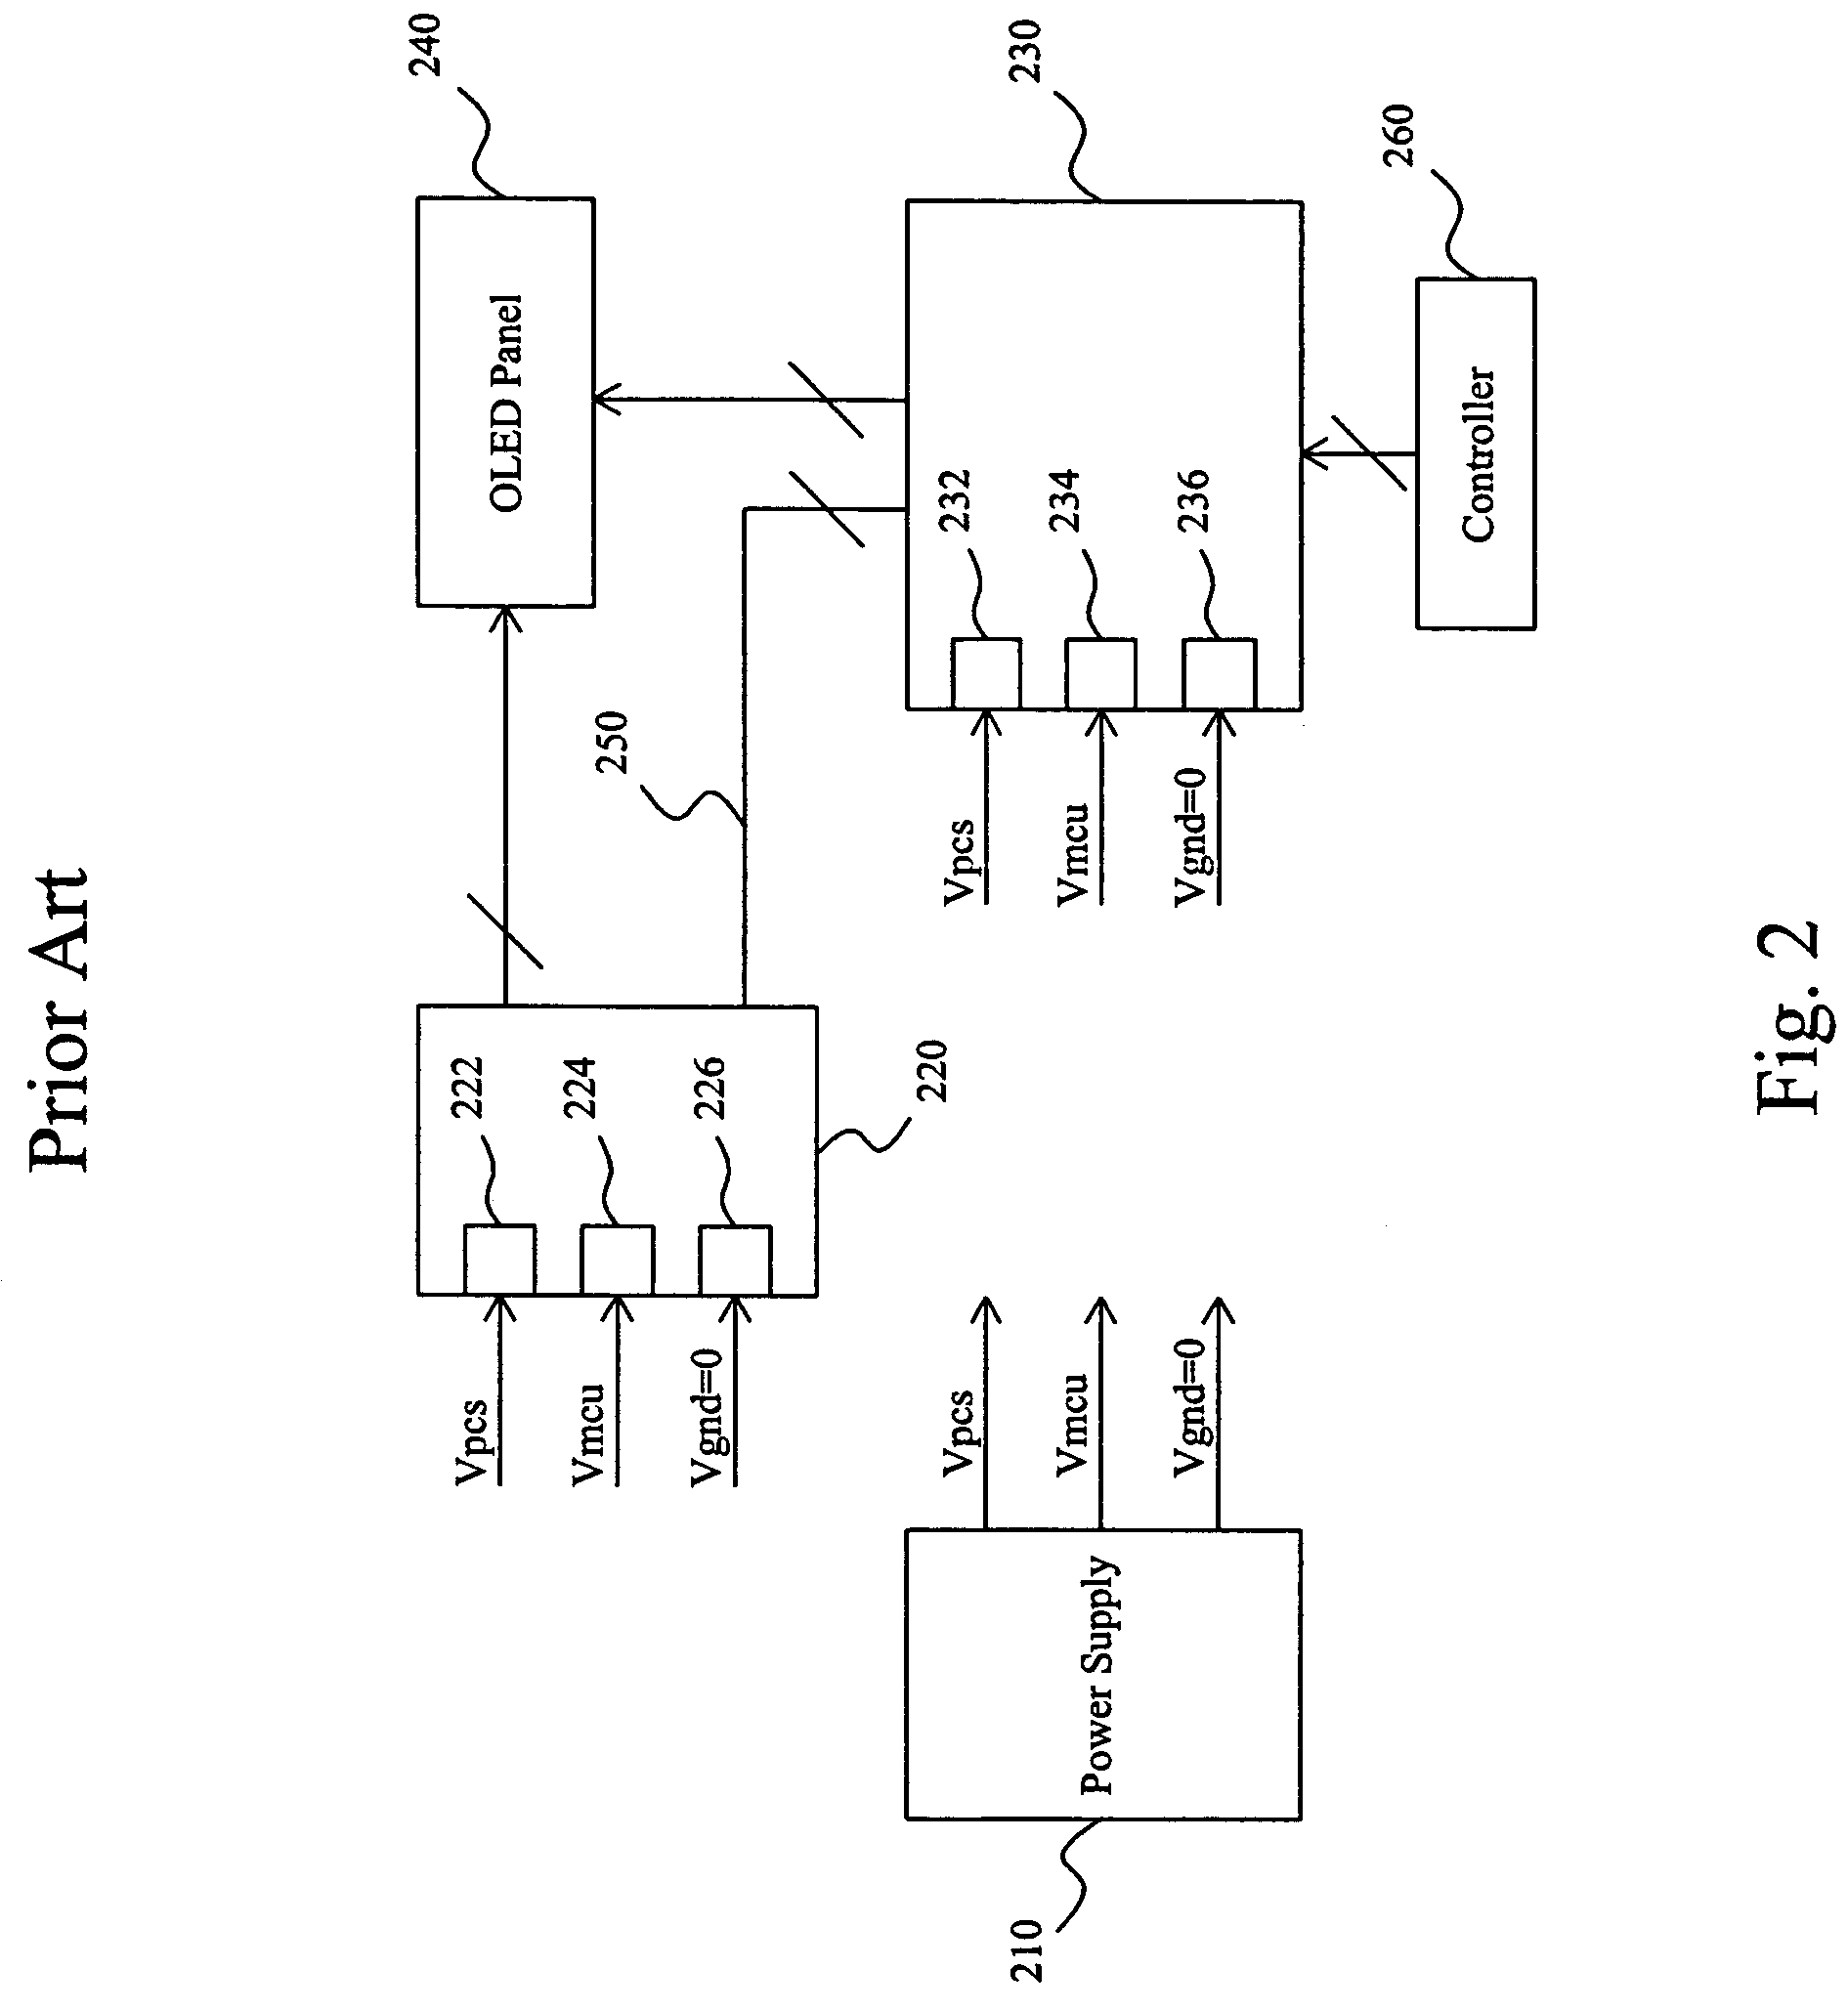 Driving arrangement for an OLED panel